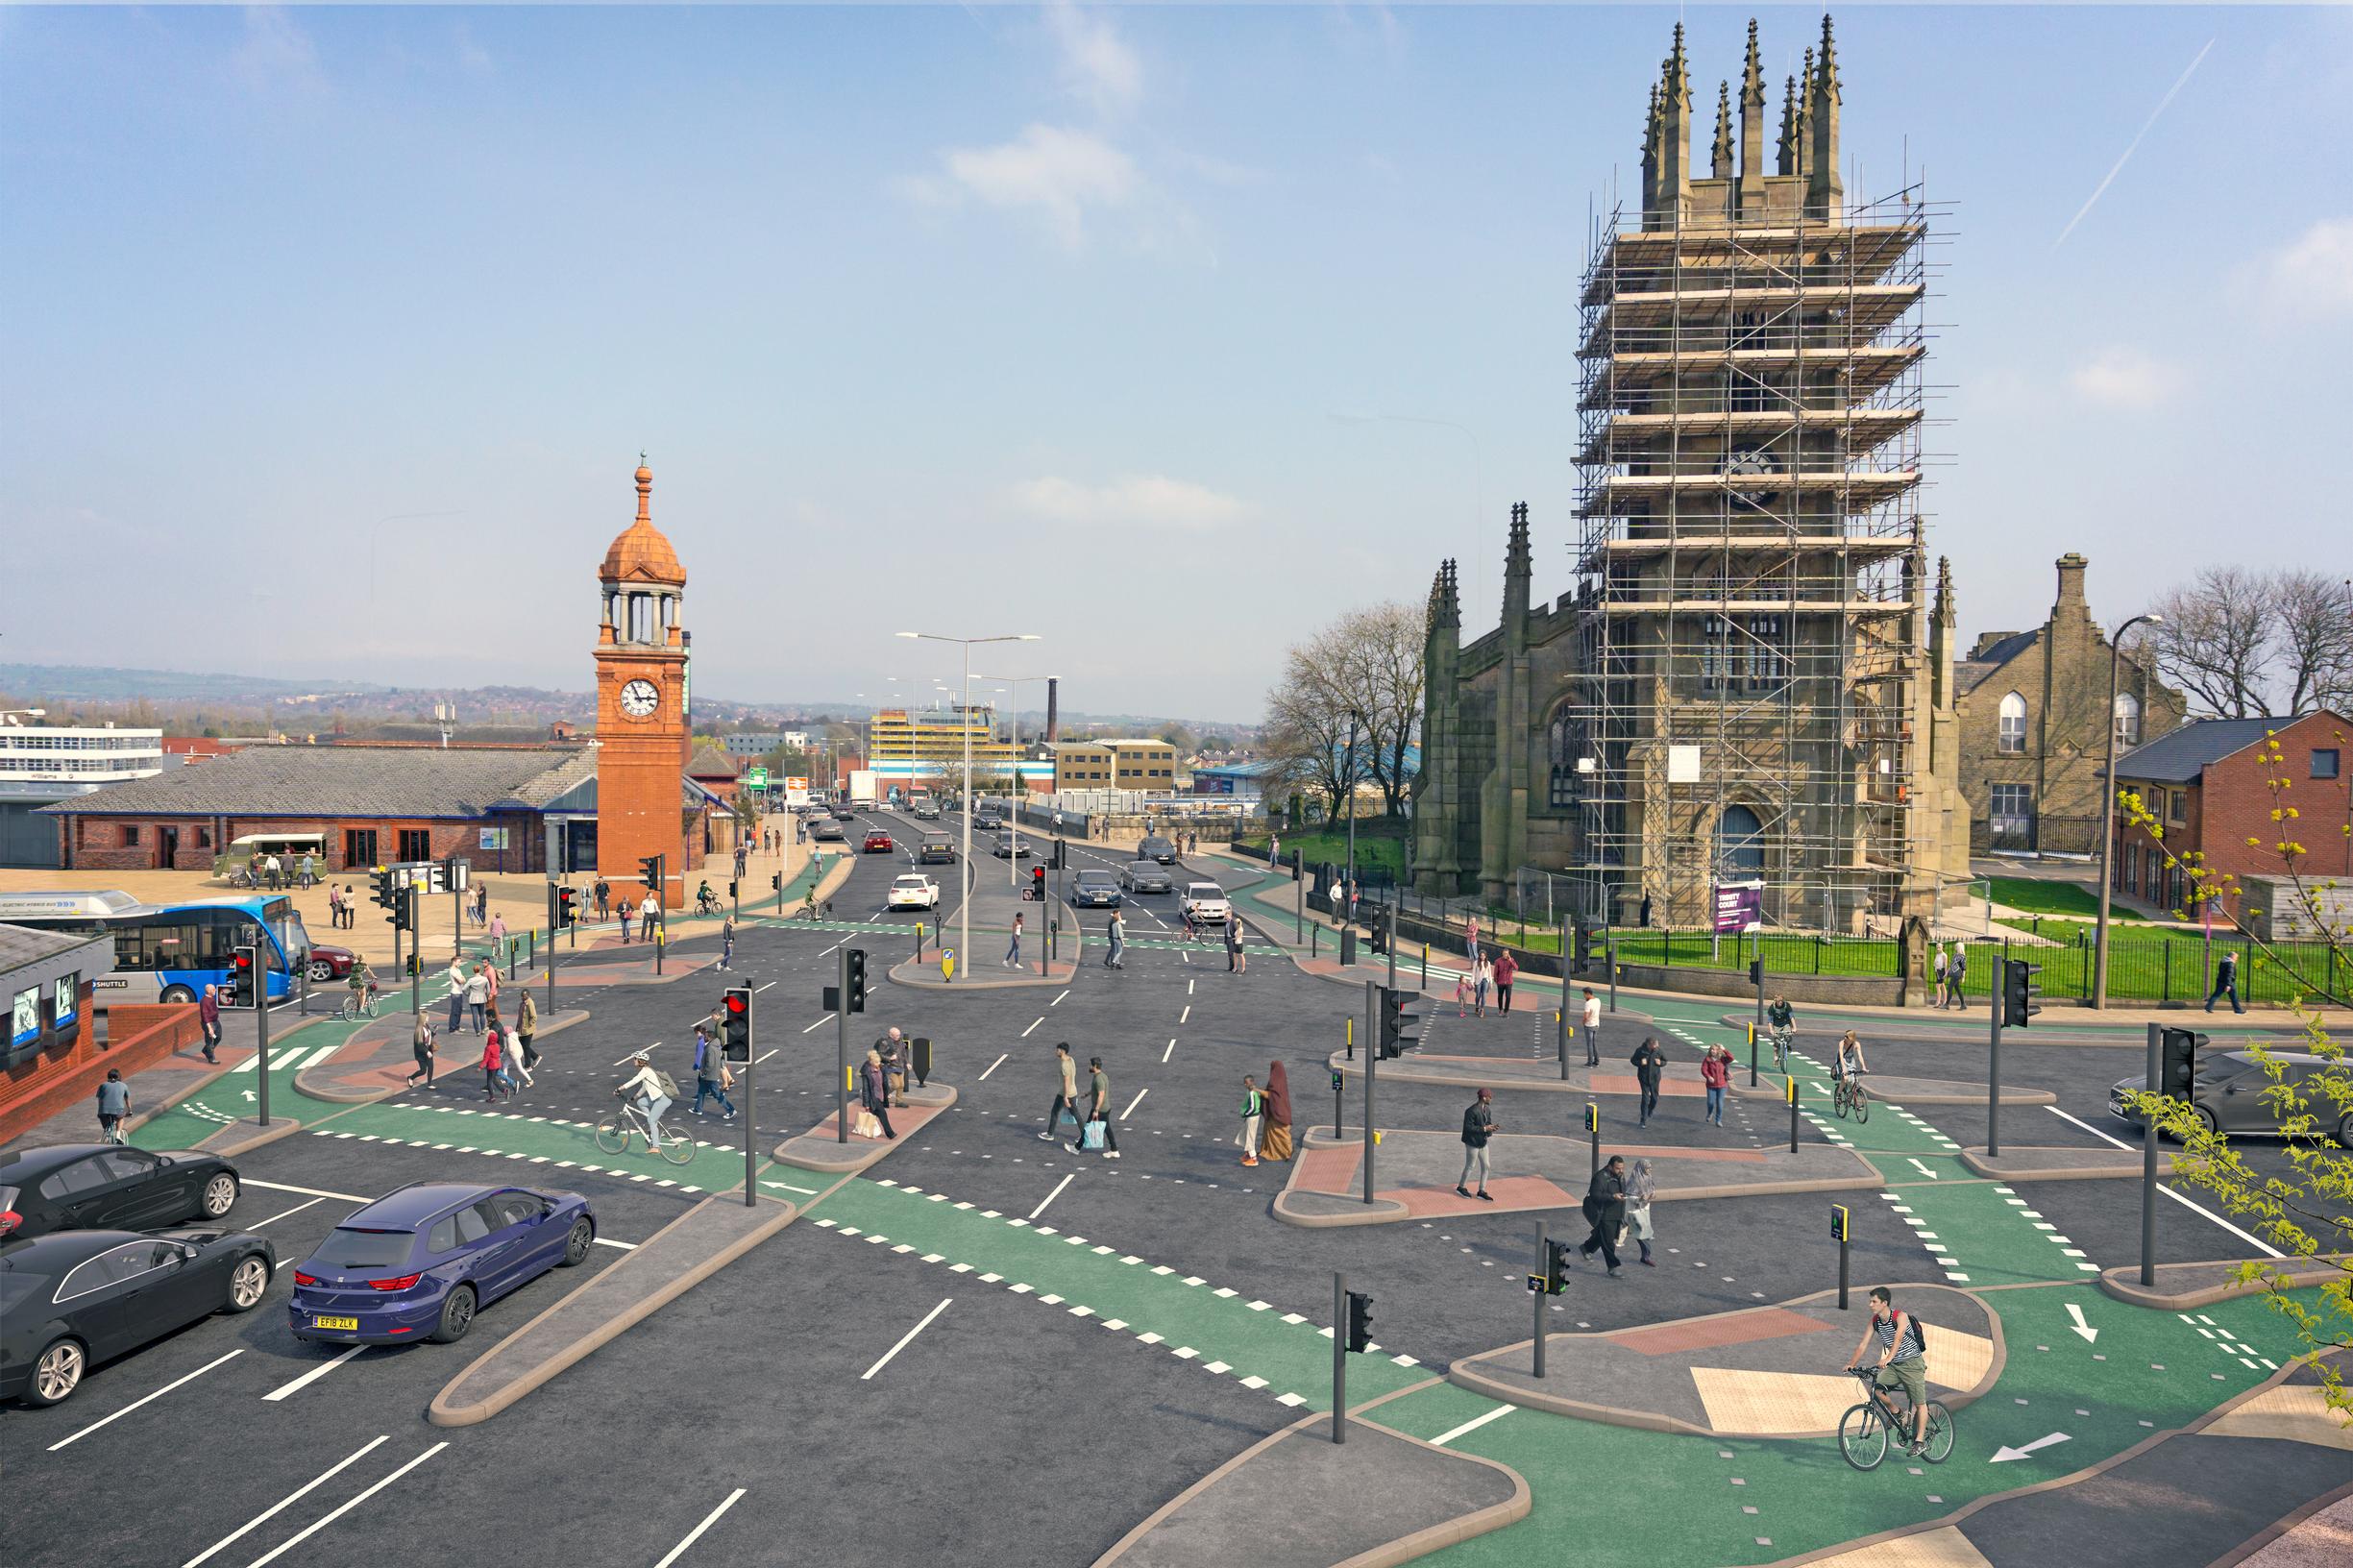 Transport for Greater Manchester is planning to install the first CYCLOPS junction in Bolton later this year